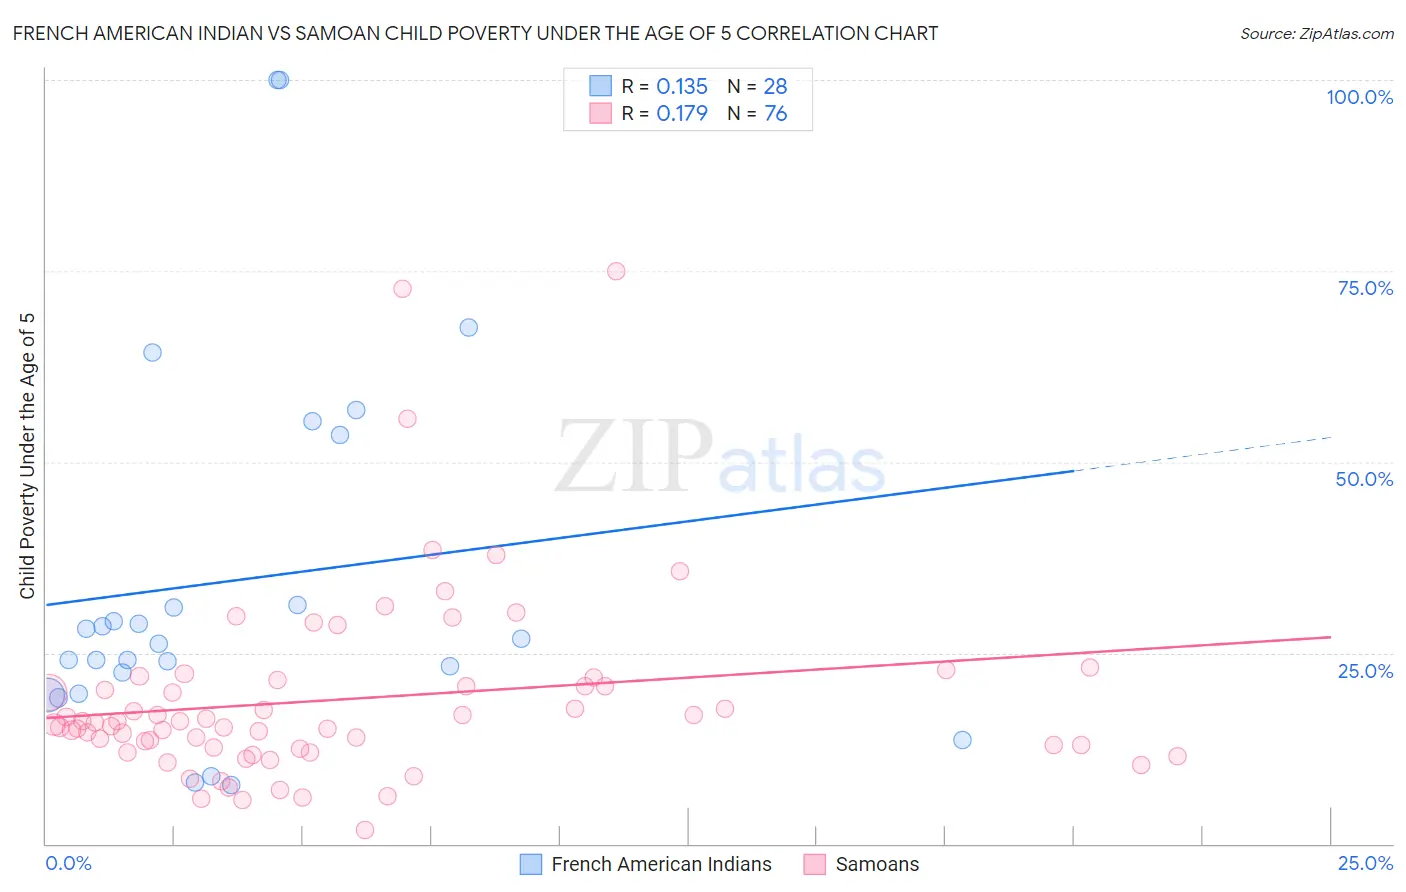 French American Indian vs Samoan Child Poverty Under the Age of 5